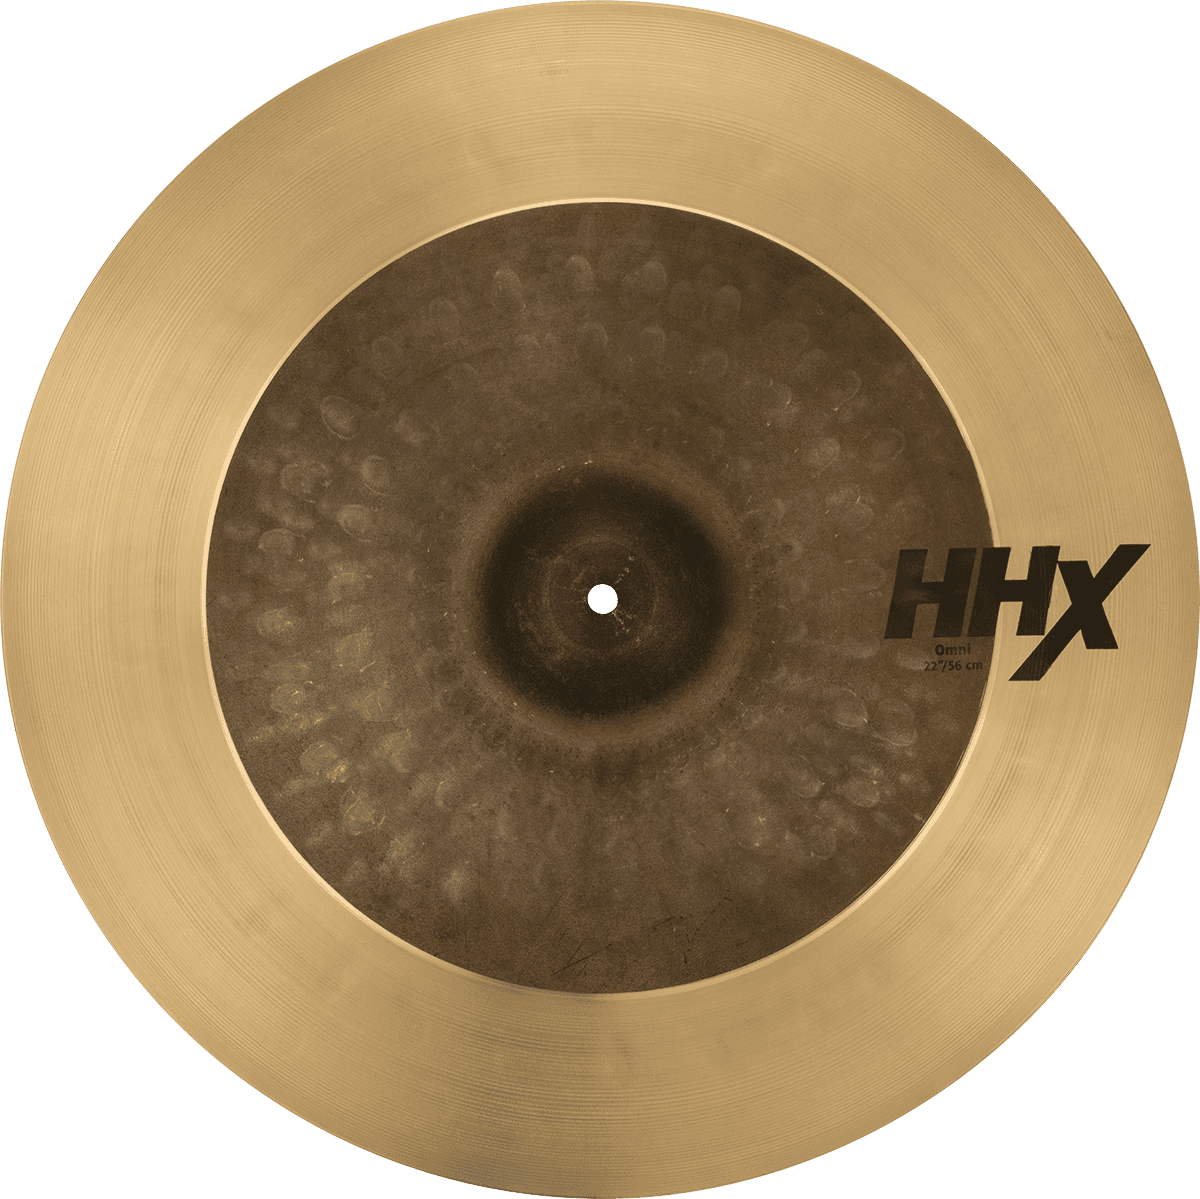 Sabian Hhx Omni Ride - 22 Pouces - Cymbale Ride - Variation 1